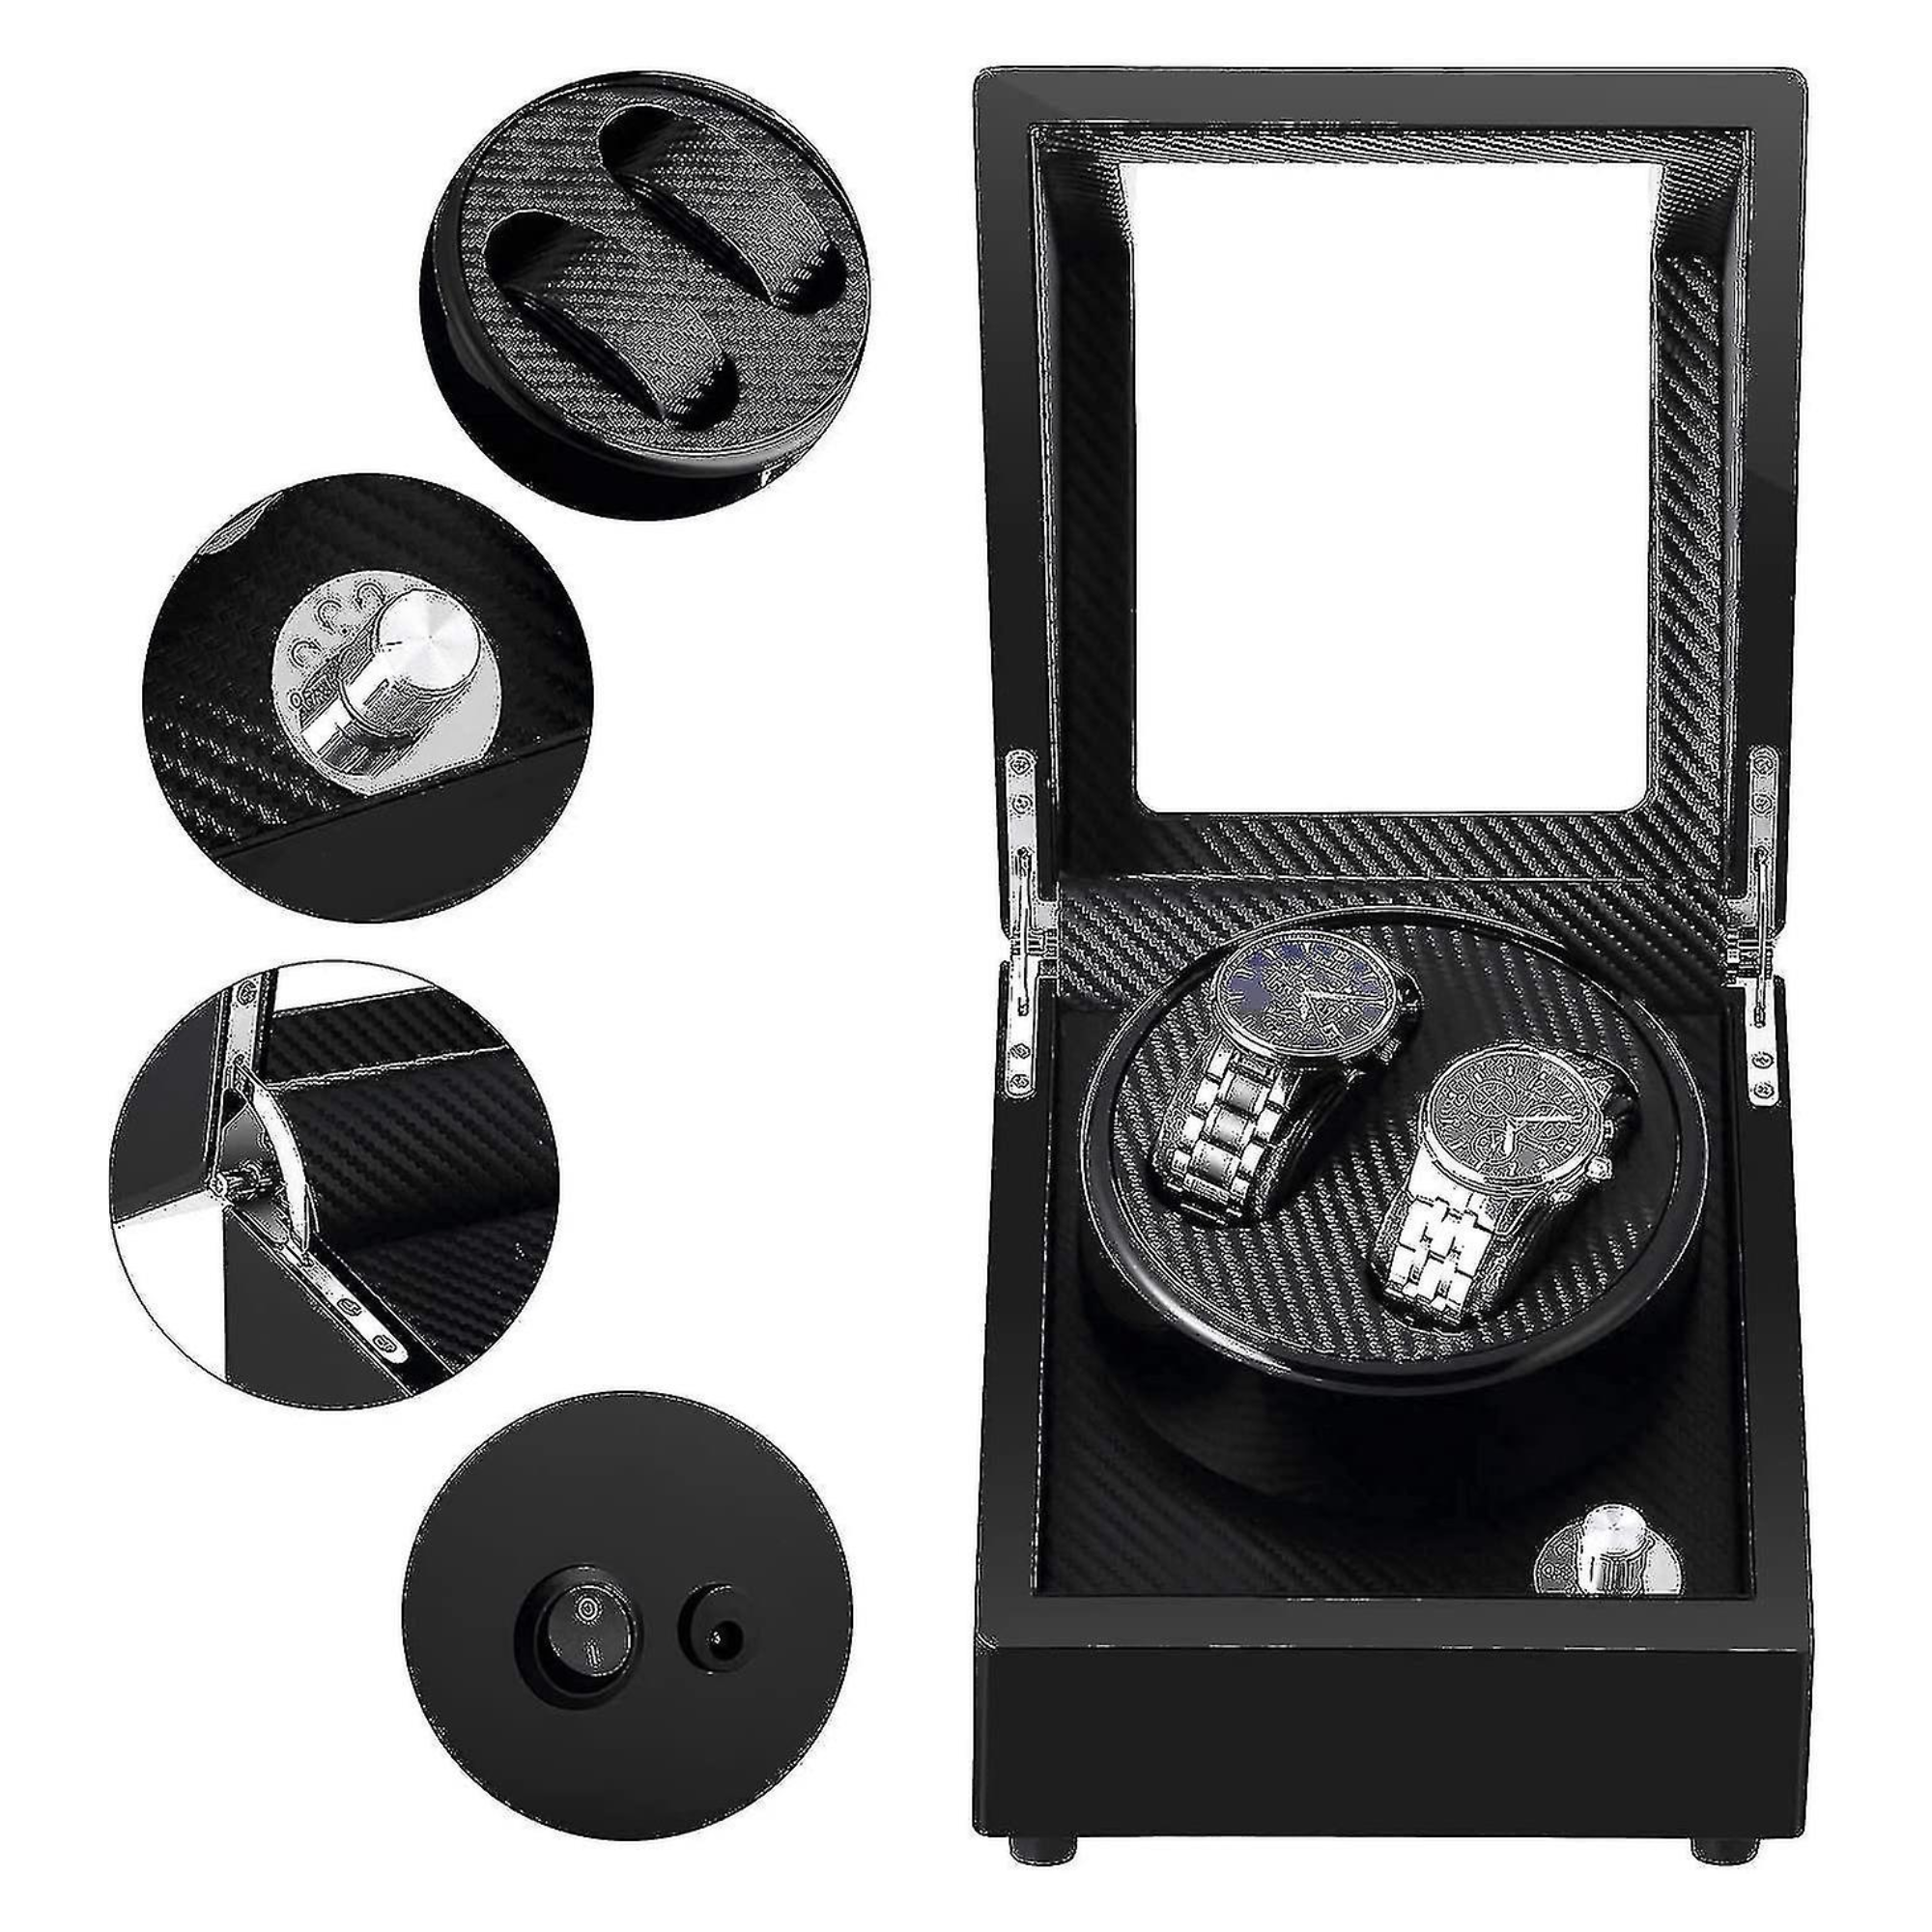 Automatic Double Watch Winder Box Luxurious Wooden Shell Piano Paint Exterior & Silent Wrist Watch Motor: Black-Carbon Fiber